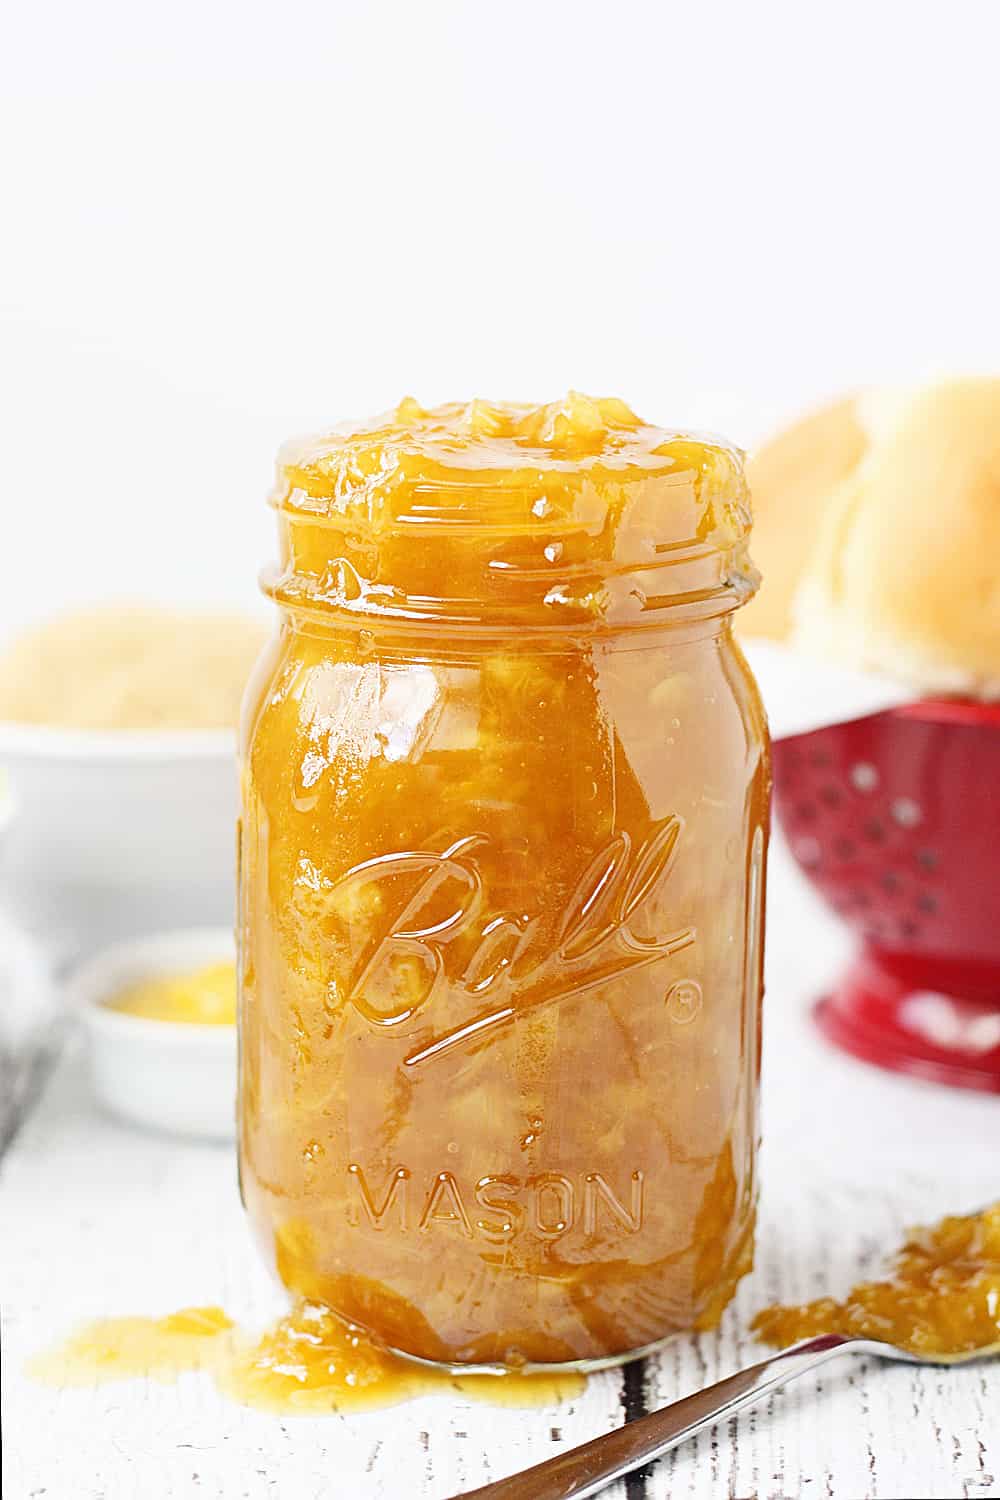 Warm Pineapple Sauce jar from the side.